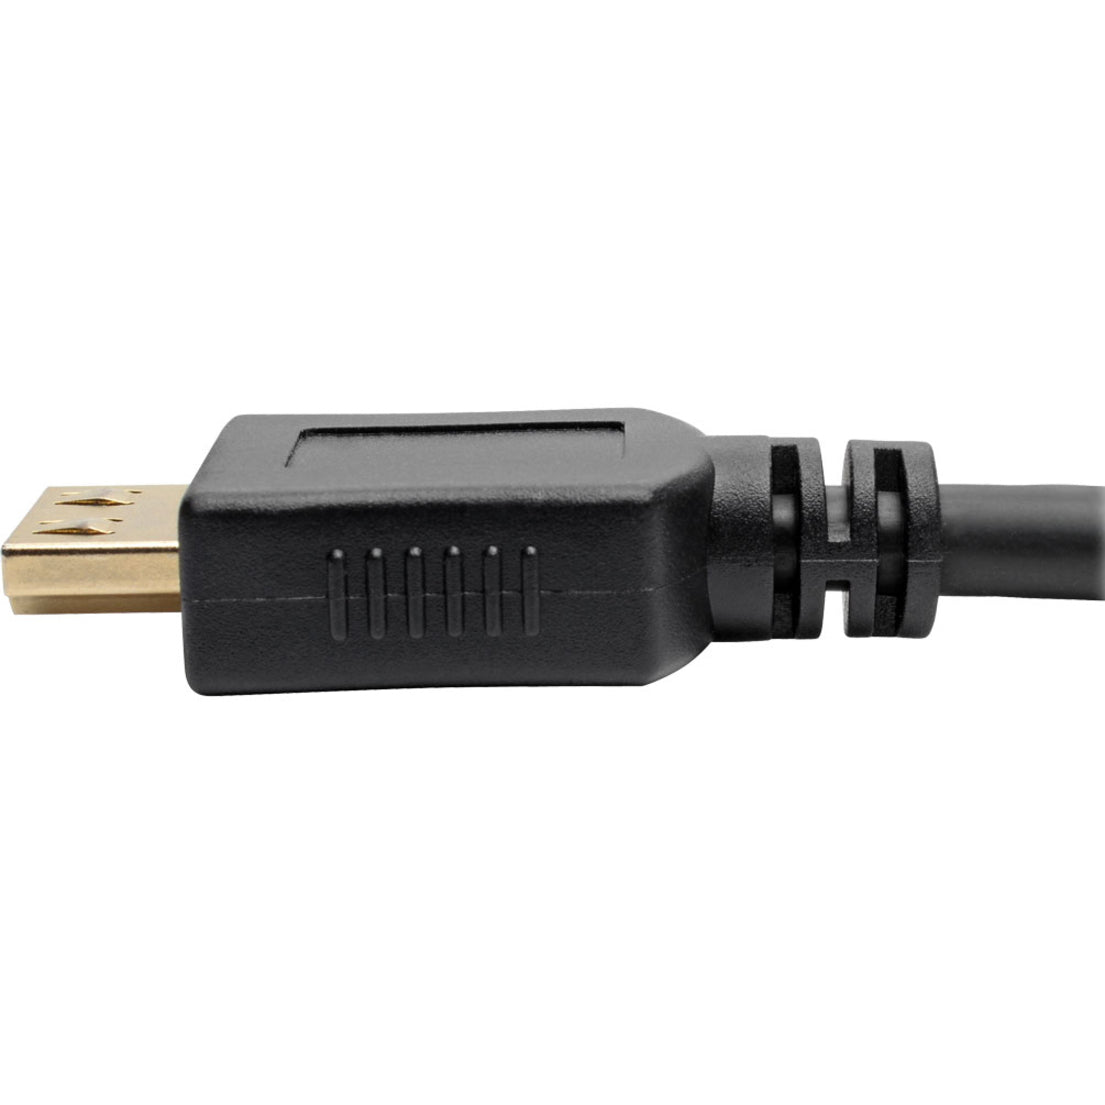 Tripp Lite: トリップライト P568-016-BK-GRP: P568-016-BK-GRP High-Speed HDMI Cable: 高速HDMIケーブル 16 ft.: 16フィート with Gripping Connectors: グリップコネクタ付き 4K: 4K Black: 黒